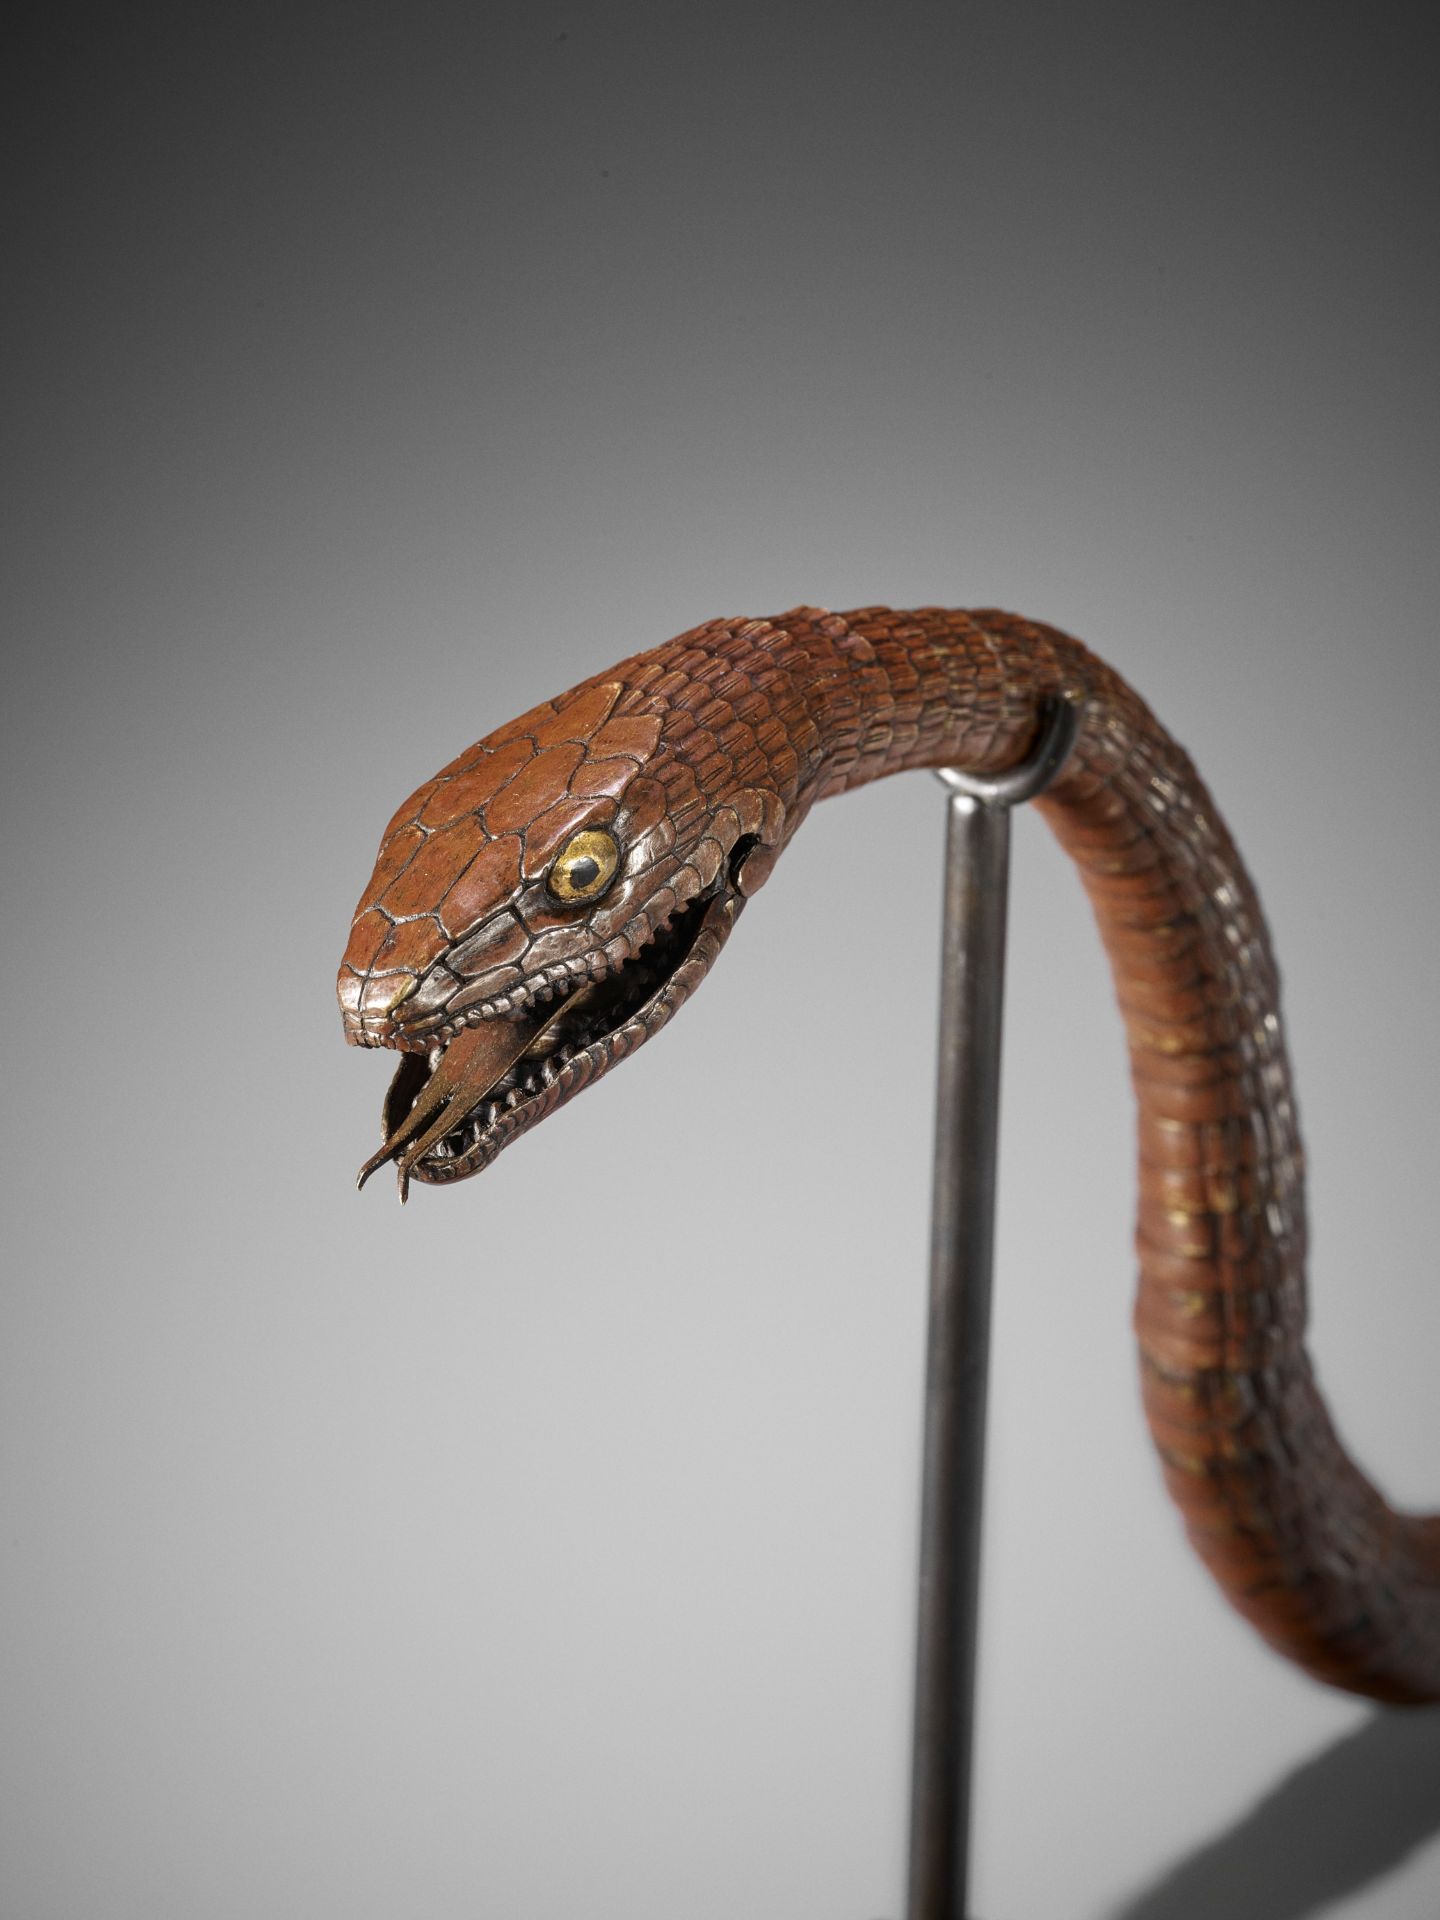 A RARE AND IMPRESSIVE PATINATED BRONZE ARTICULATED MODEL OF A SNAKE - Image 6 of 7